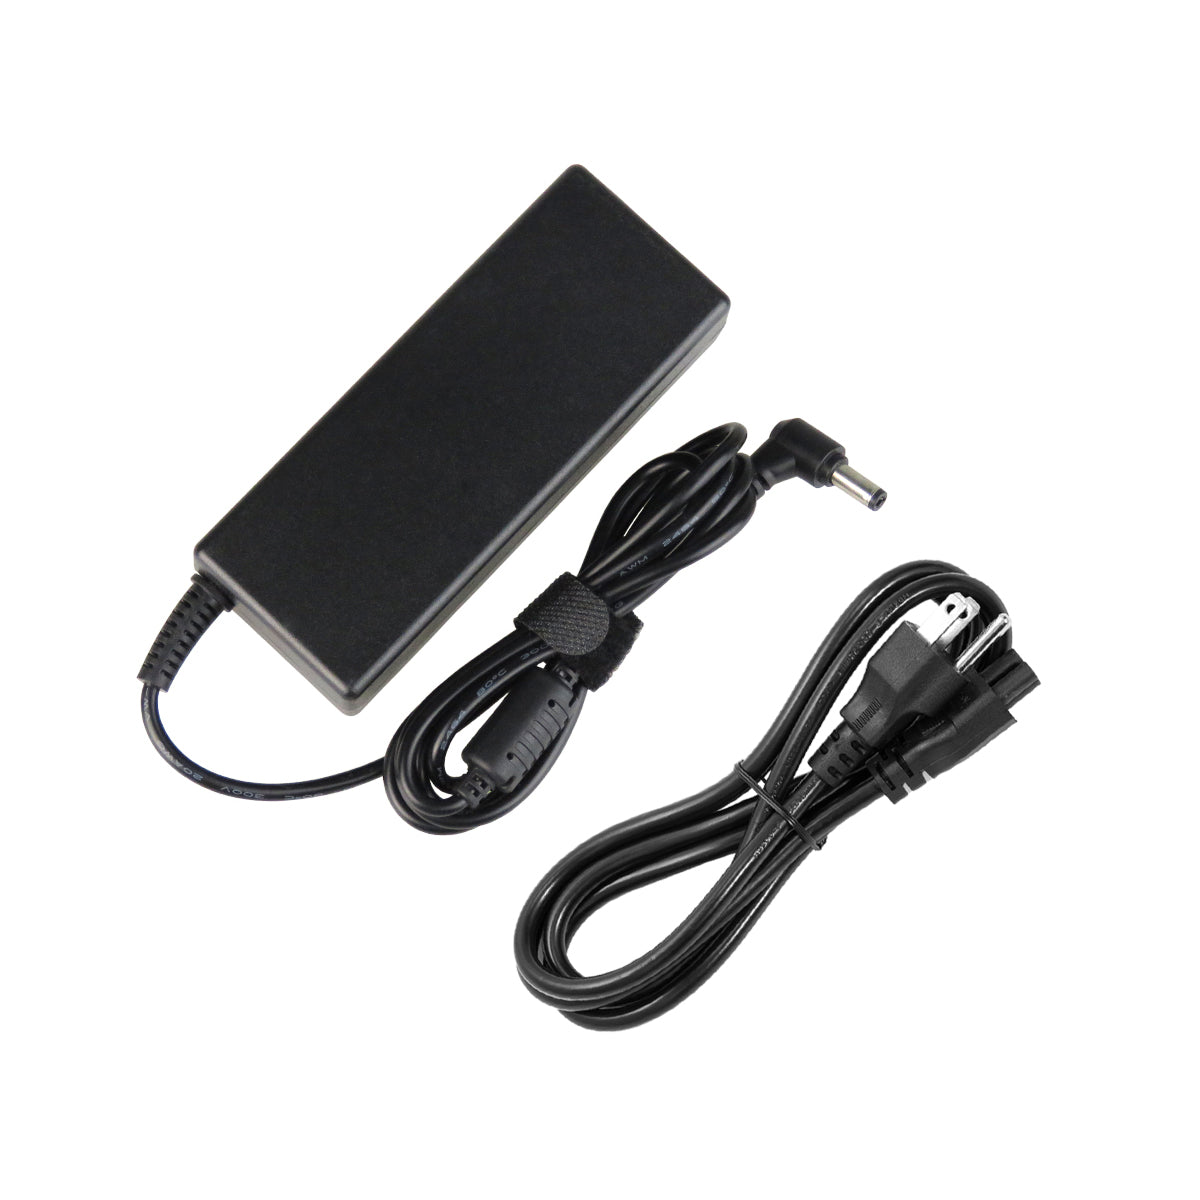 AC Adapter Charger for ASUS K54C Notebook.